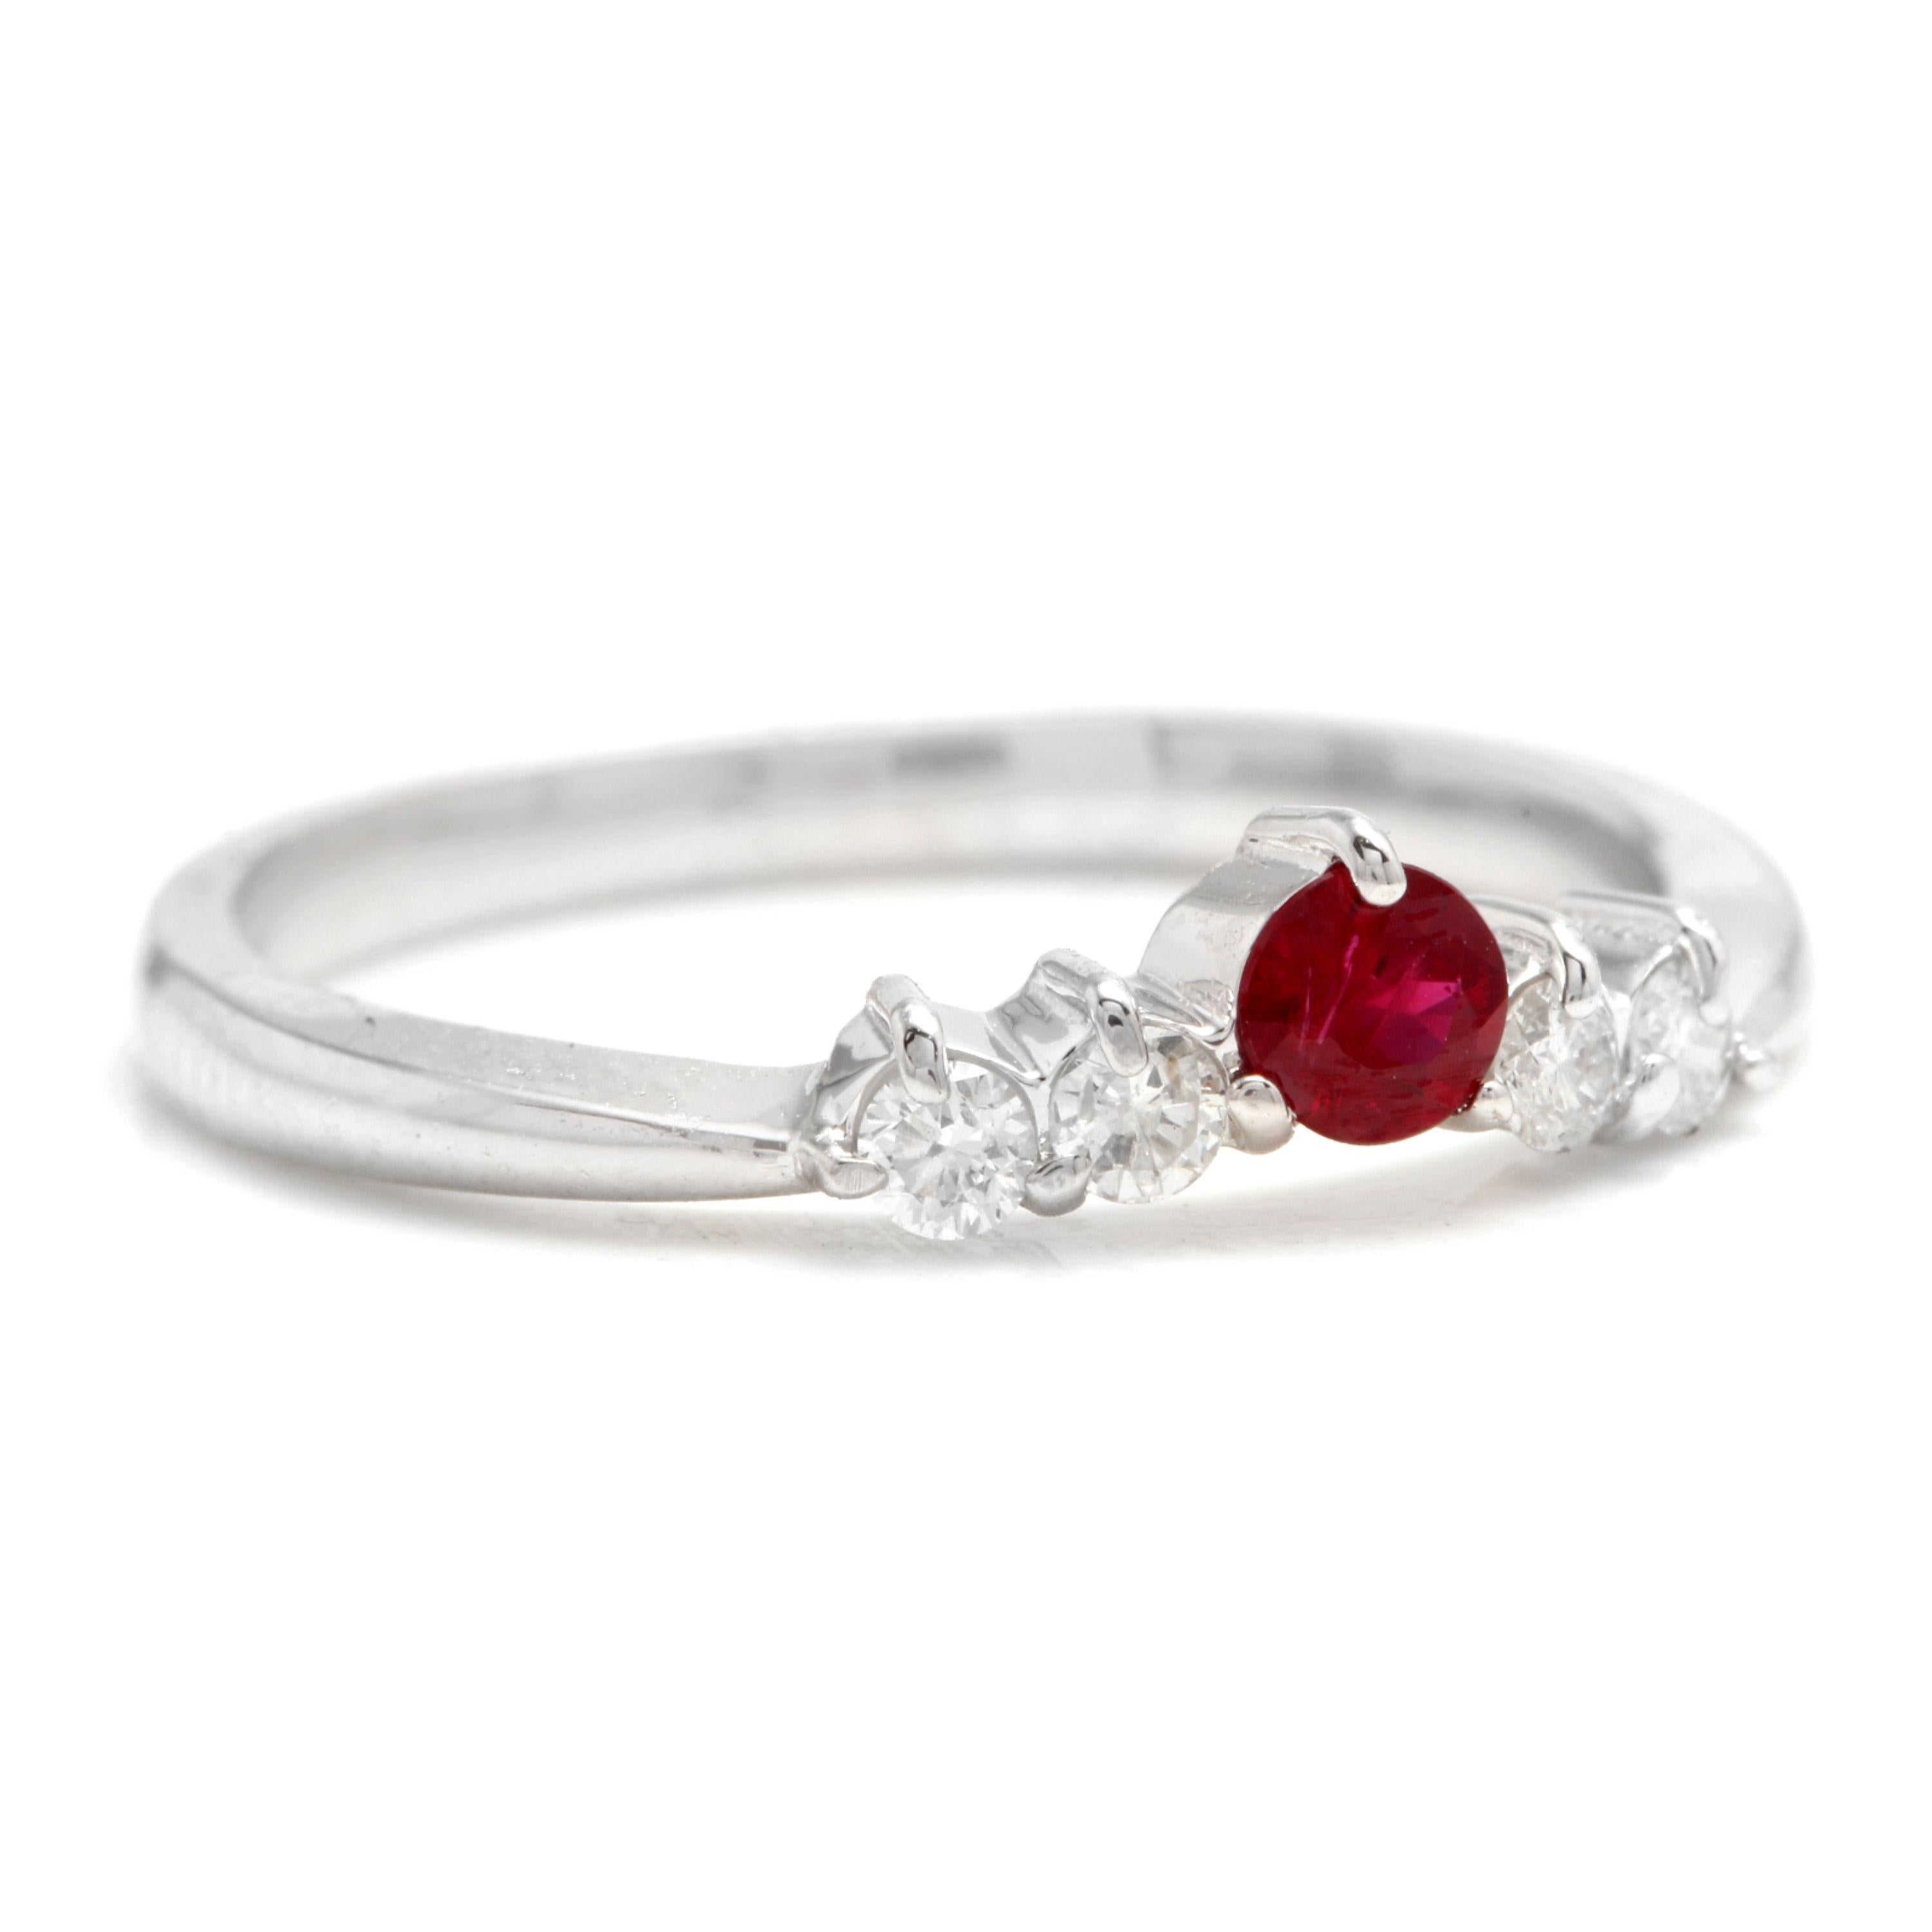 Impressive Natural Untreated Ruby and Natural Diamond 14K White Gold Ring

Suggested Replacement Value: Approx. $1,200.00

Total Natural Red Ruby Measures: Approx. 3.30mm

Ruby Treatment: Untreated 

Total Ruby Weight is: Approx. 0.15ct

Natural